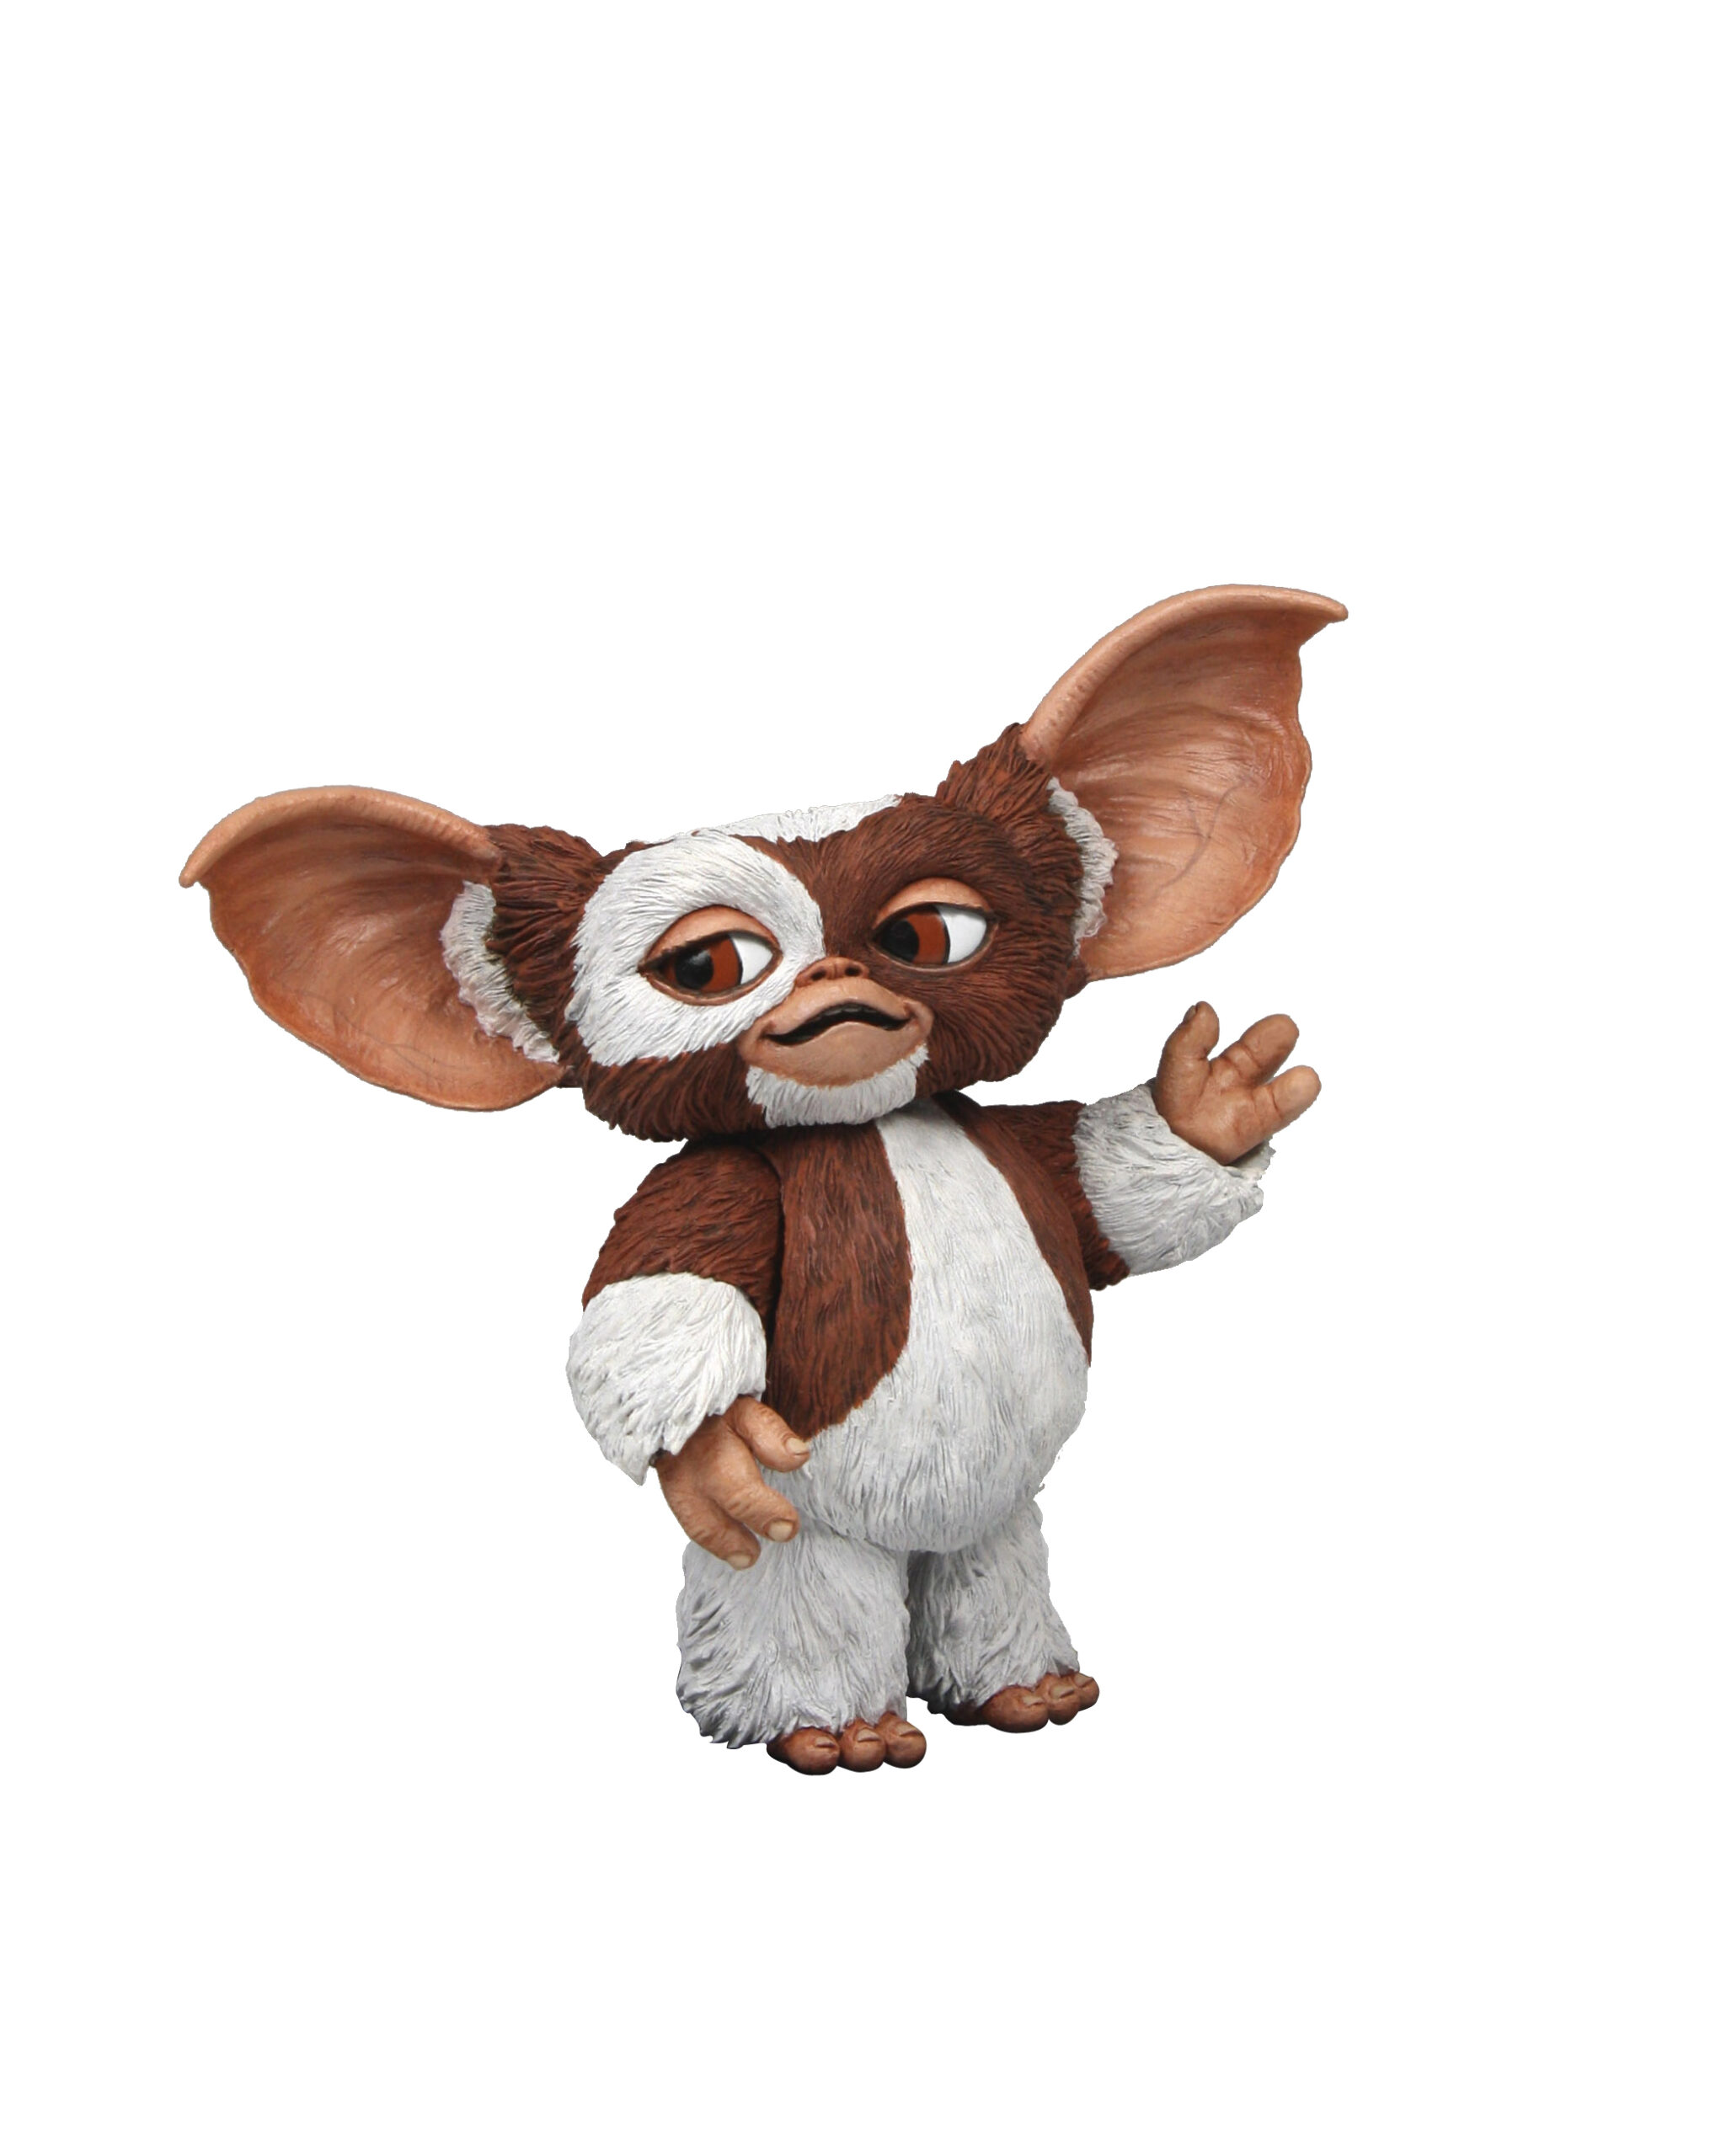 NECA: Gremlins 2 - Mogwais in Blister Card 7 Tall Action Figure